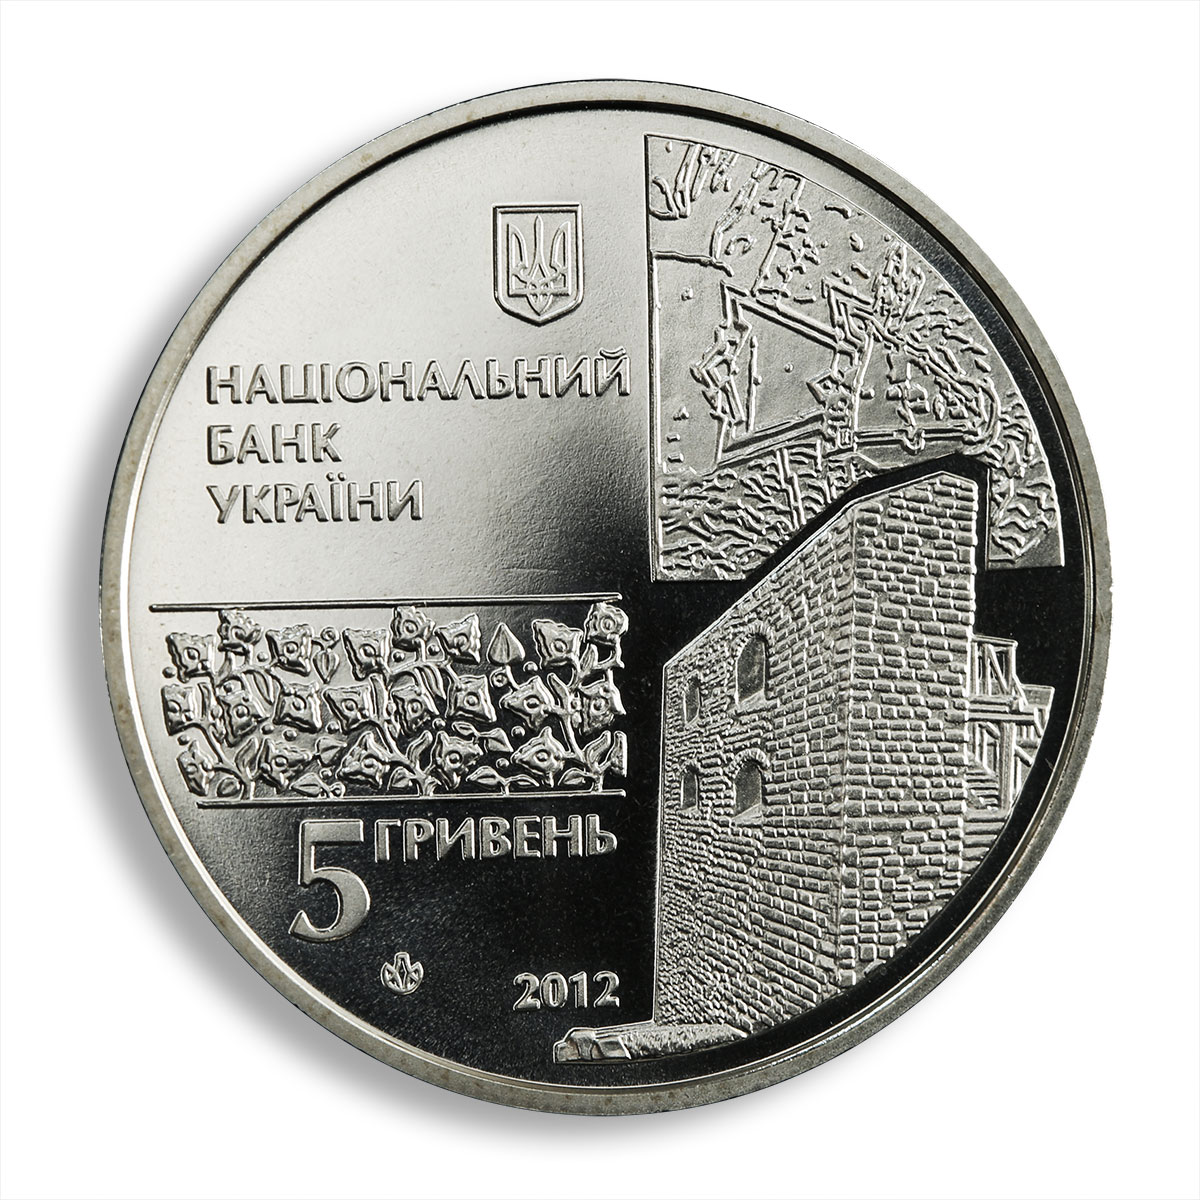 Ukraine 5 hryvnia 500 years to Chyhyryn Ancient Cities fortress nickel coin 2012